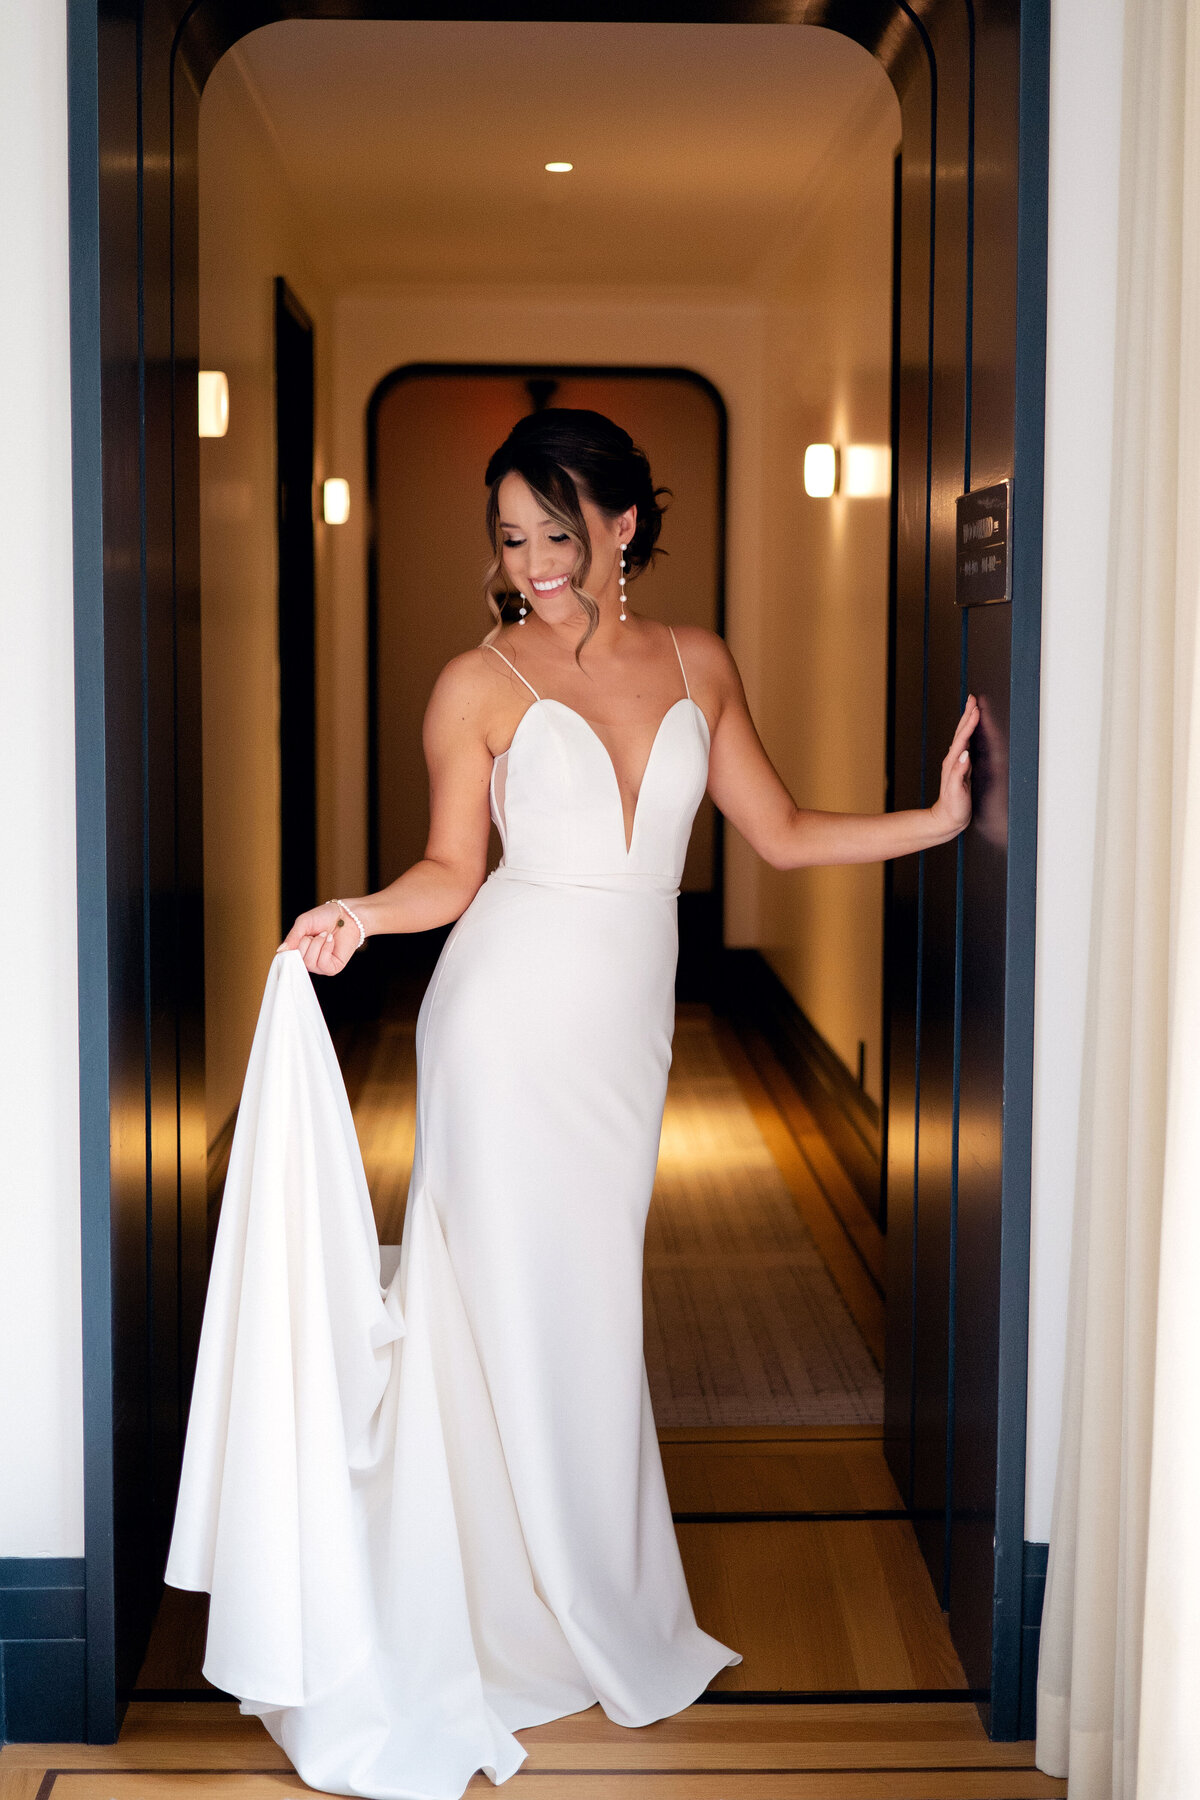 A photo of a bride holding the tail of her chiffon wedding gown and looking at her dress in her hand.  She is smiling and standing in a black rimmed doorway